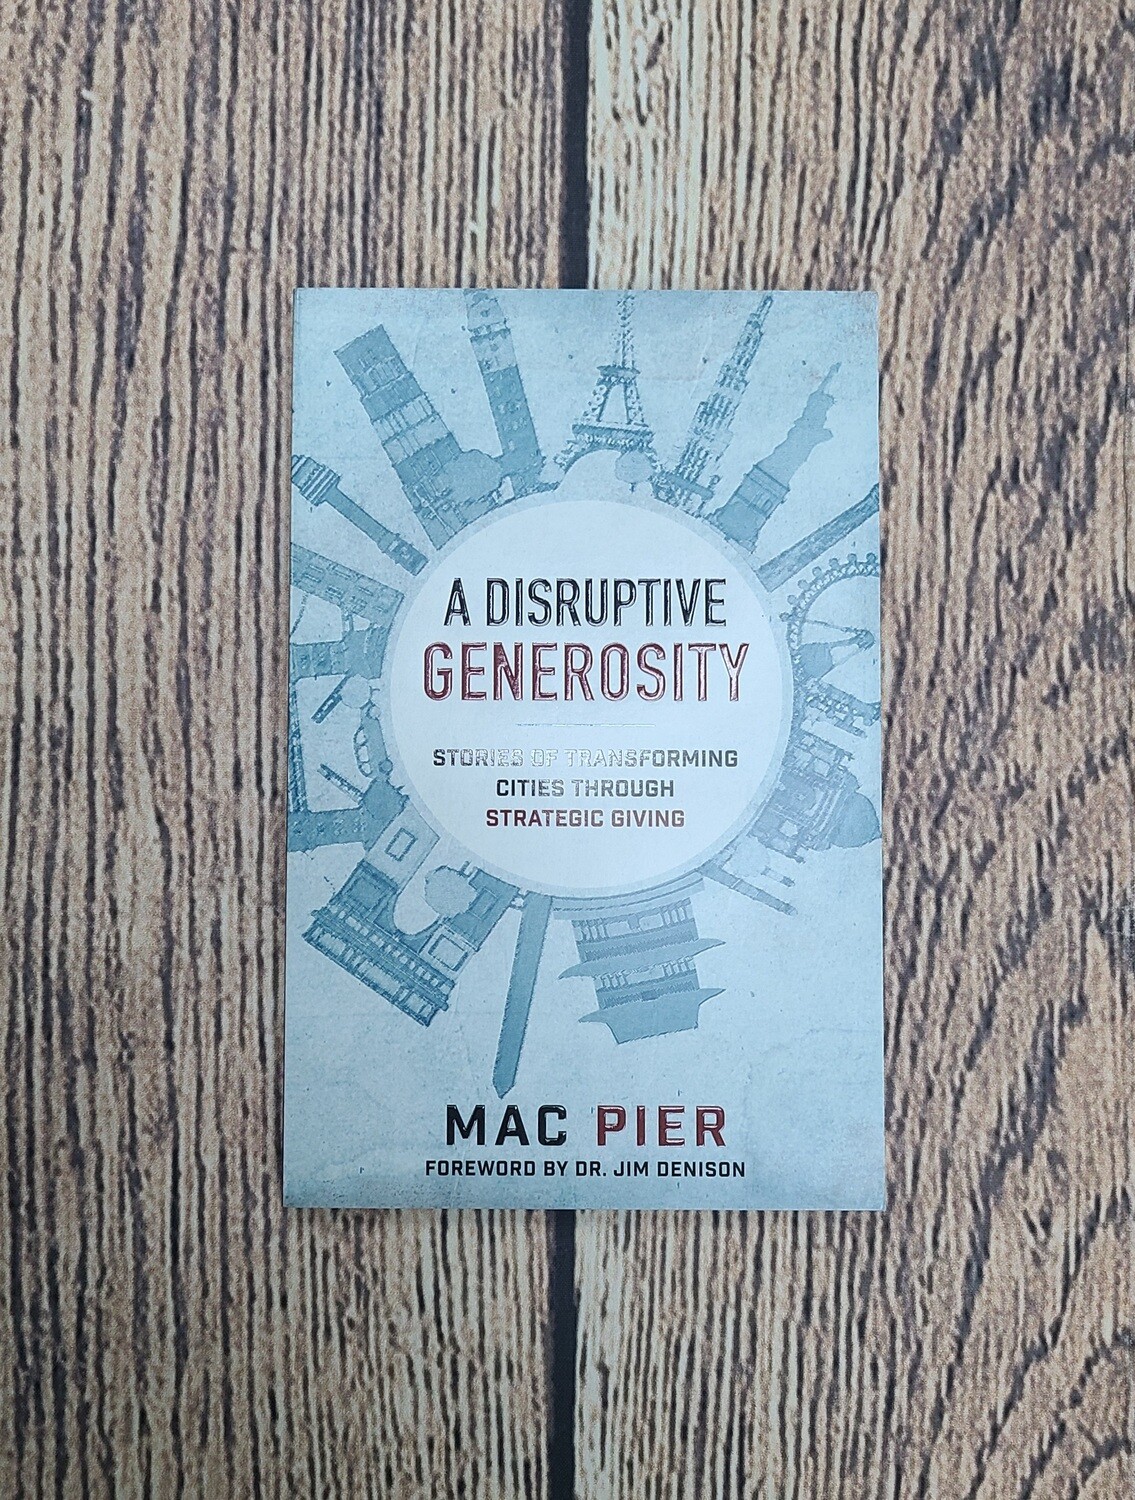 A Disruptive Generosity: Stories of Transforming Cities Through Strategic Giving by Mac Pier